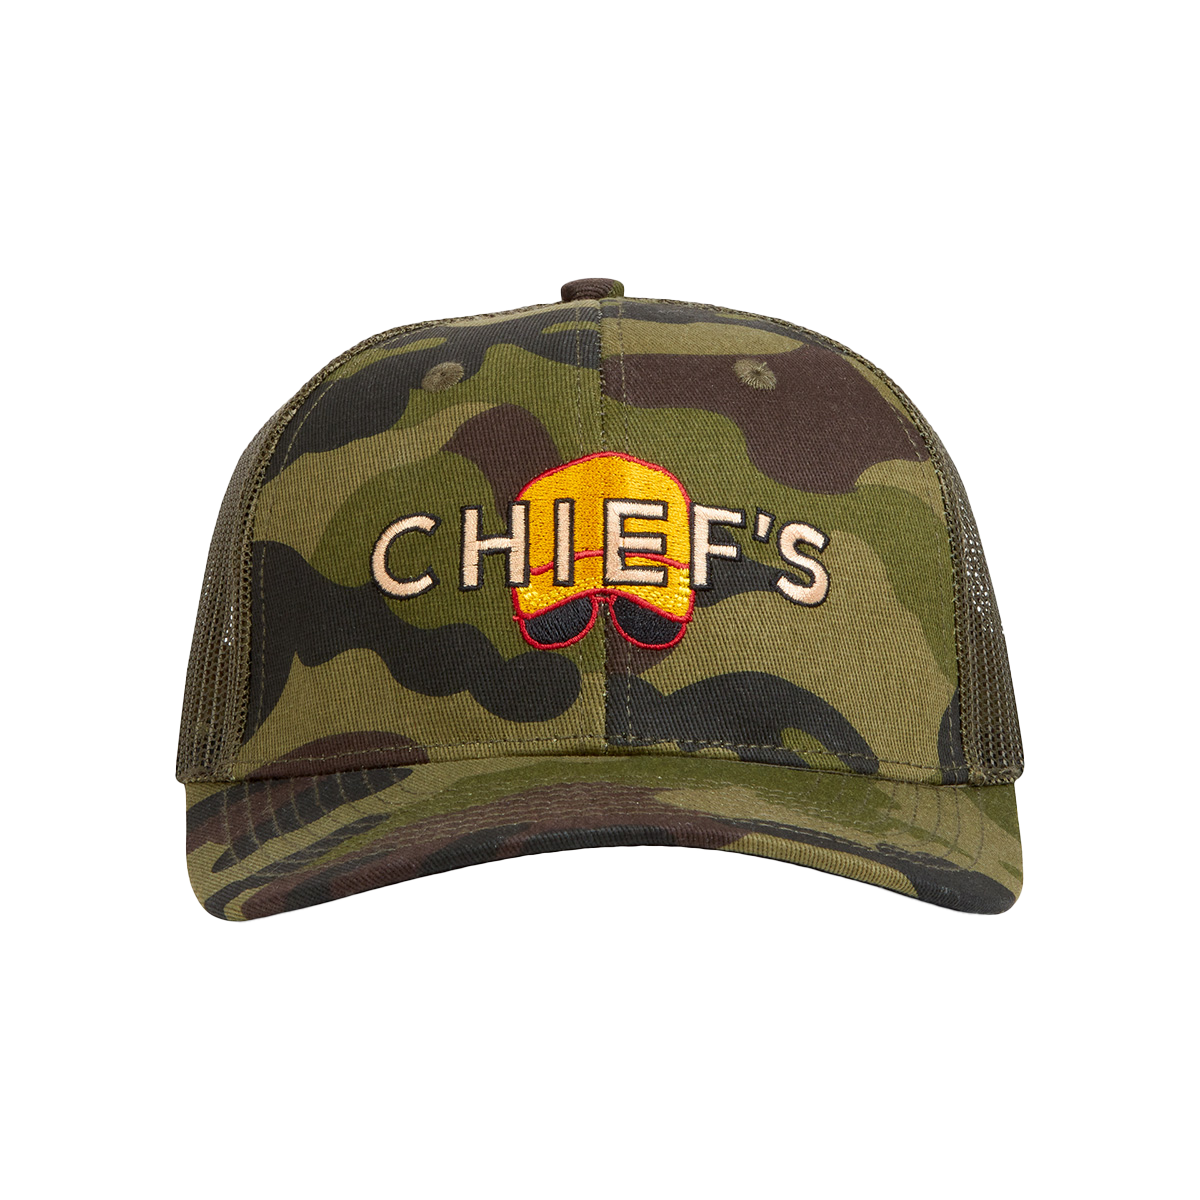 Chief's Marquee Hat - Camo